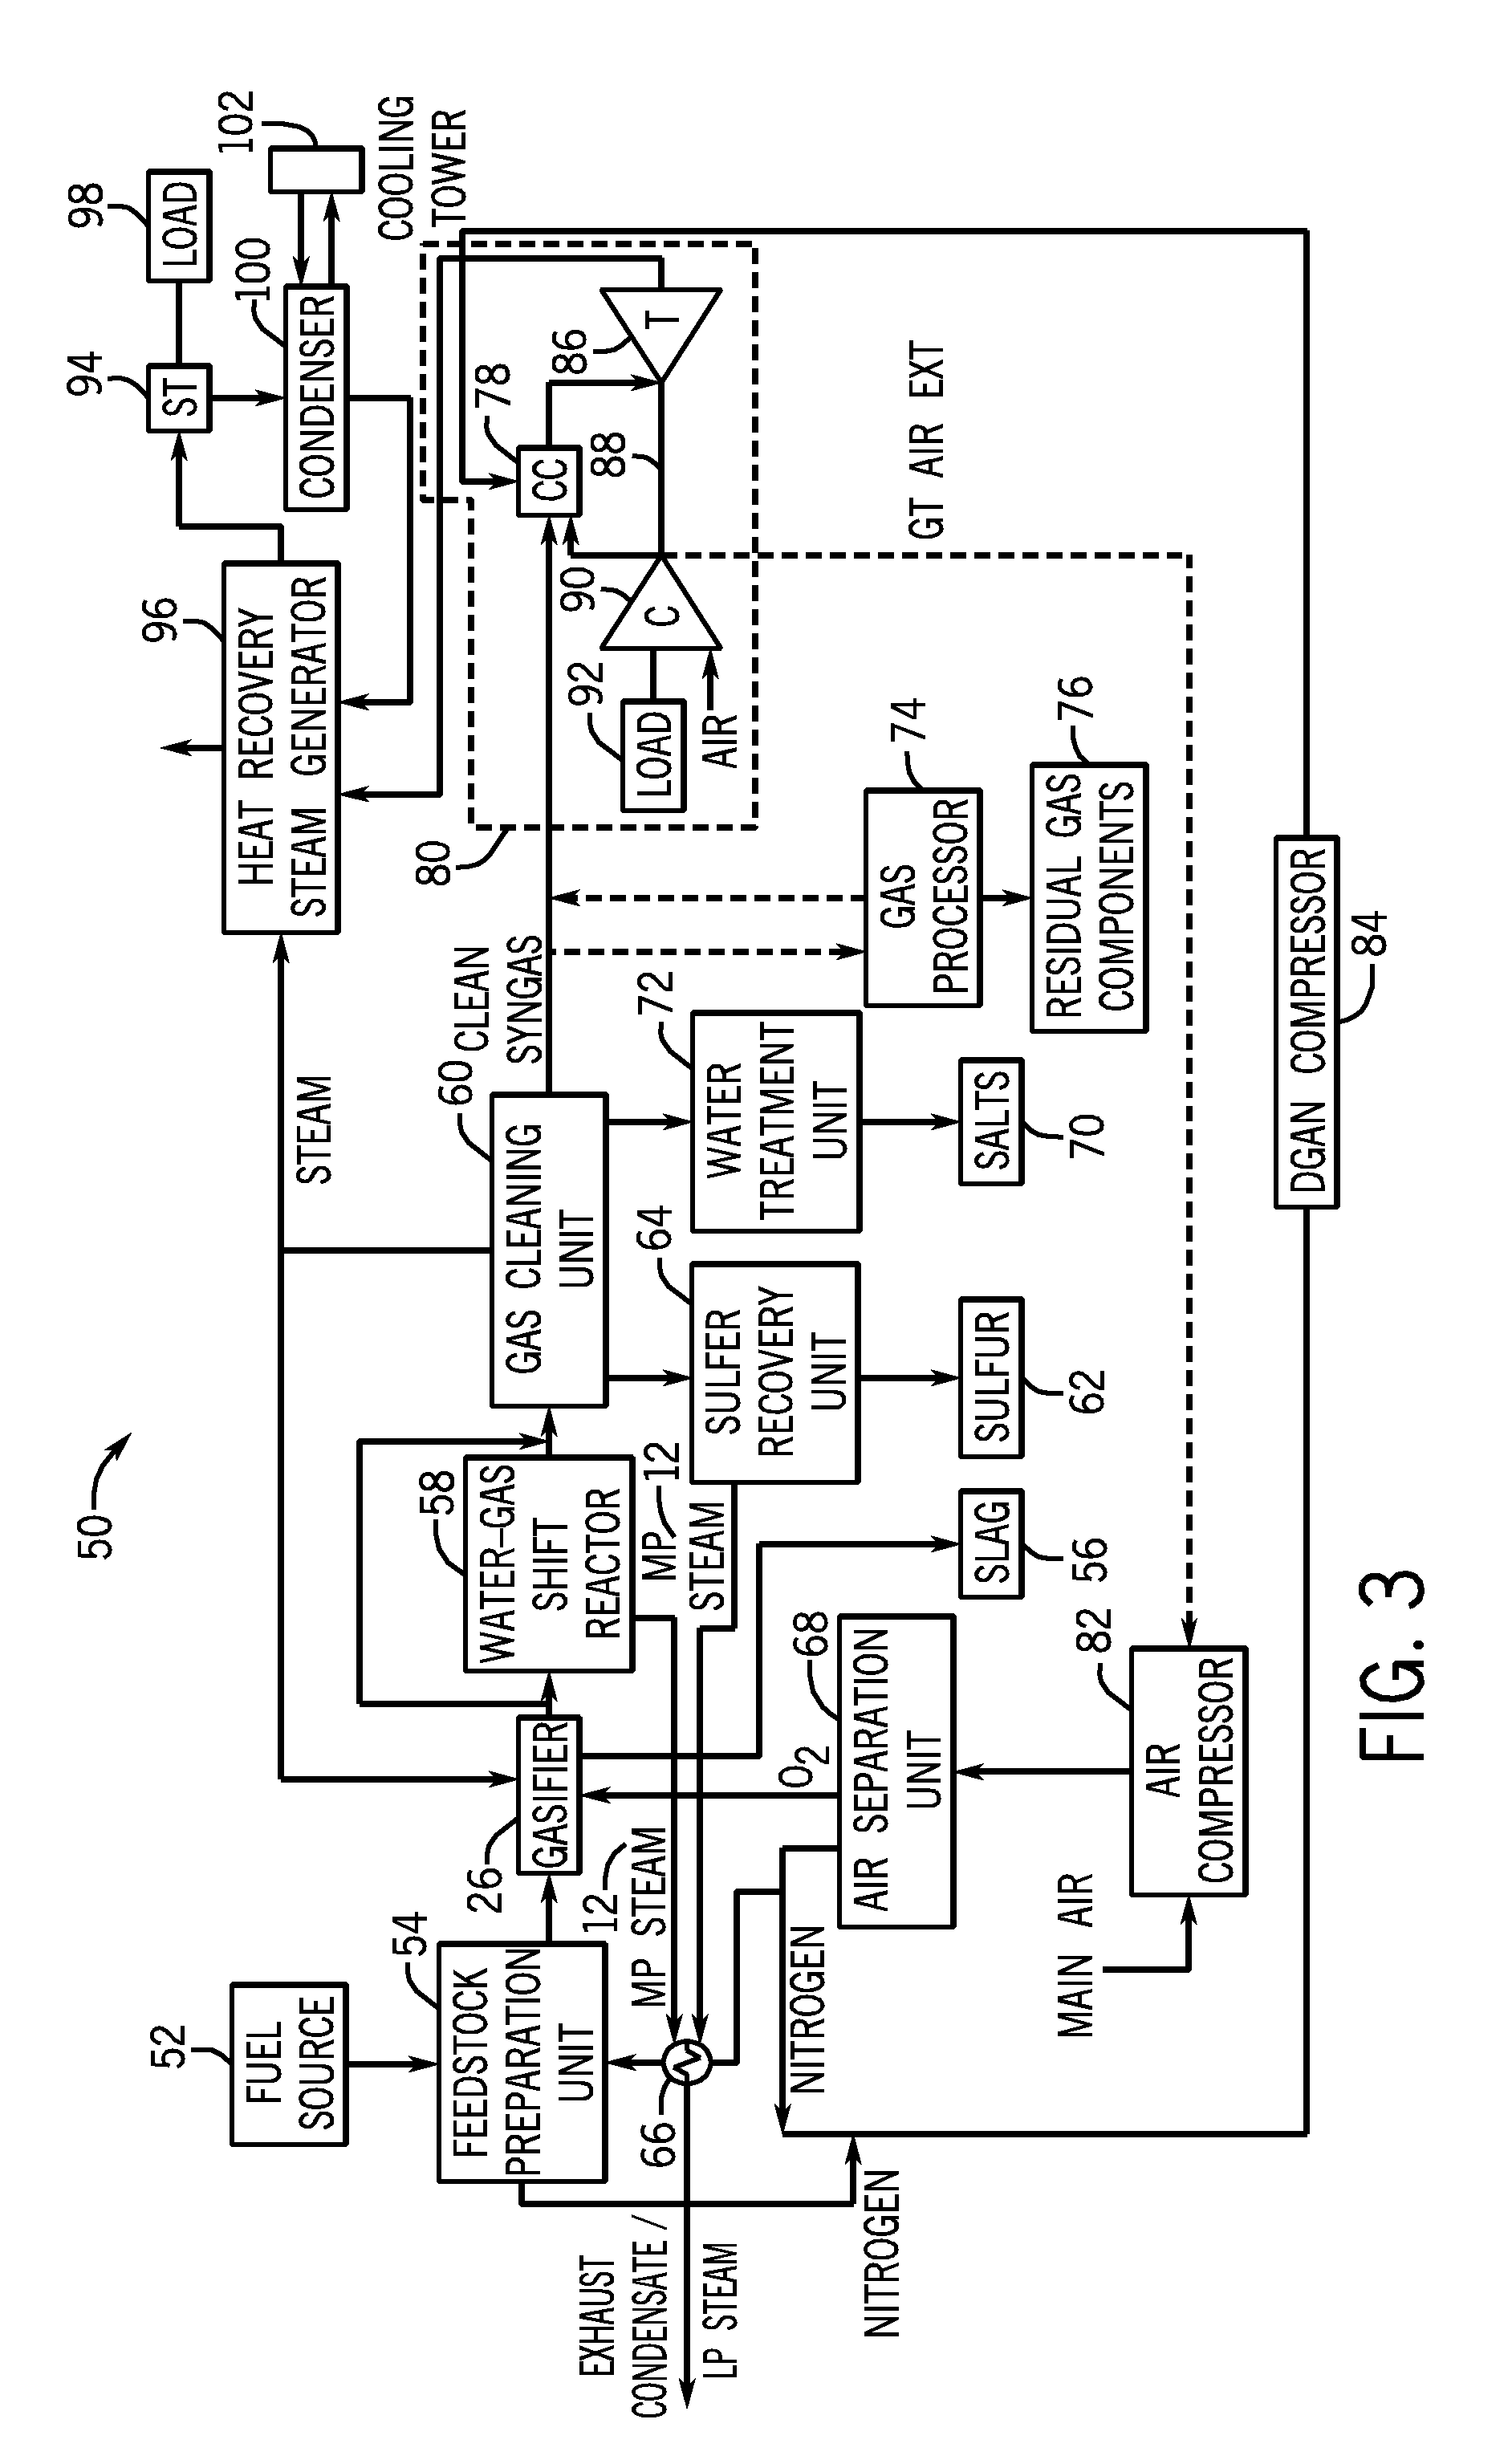 Method and apparatus for drying solid feedstock using steam